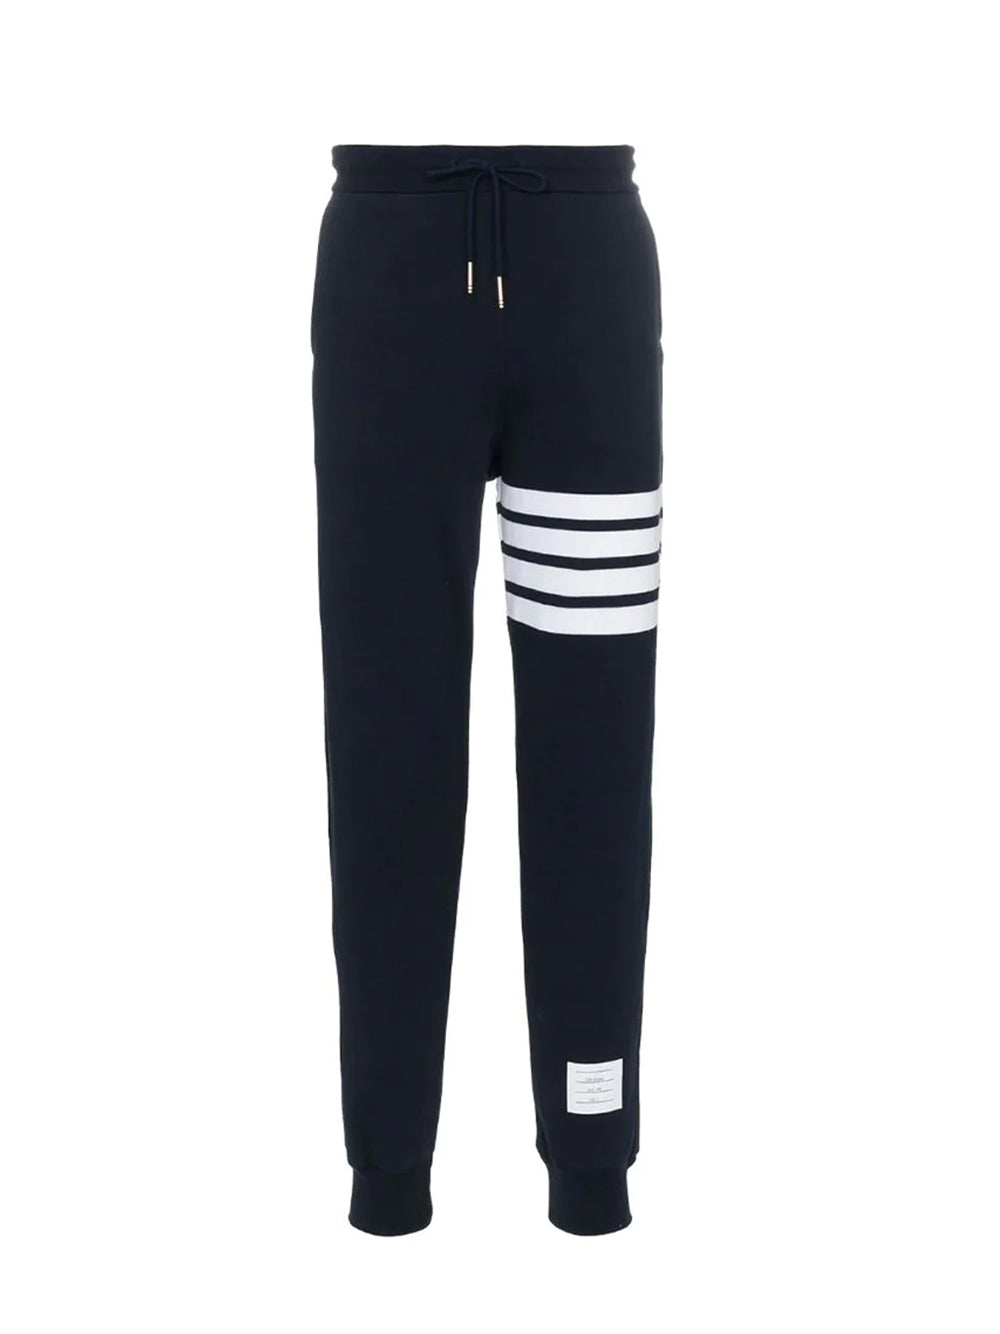 Classic Sweatpant In Classic Loopback W/ Engineered 4 Bar (Navy)